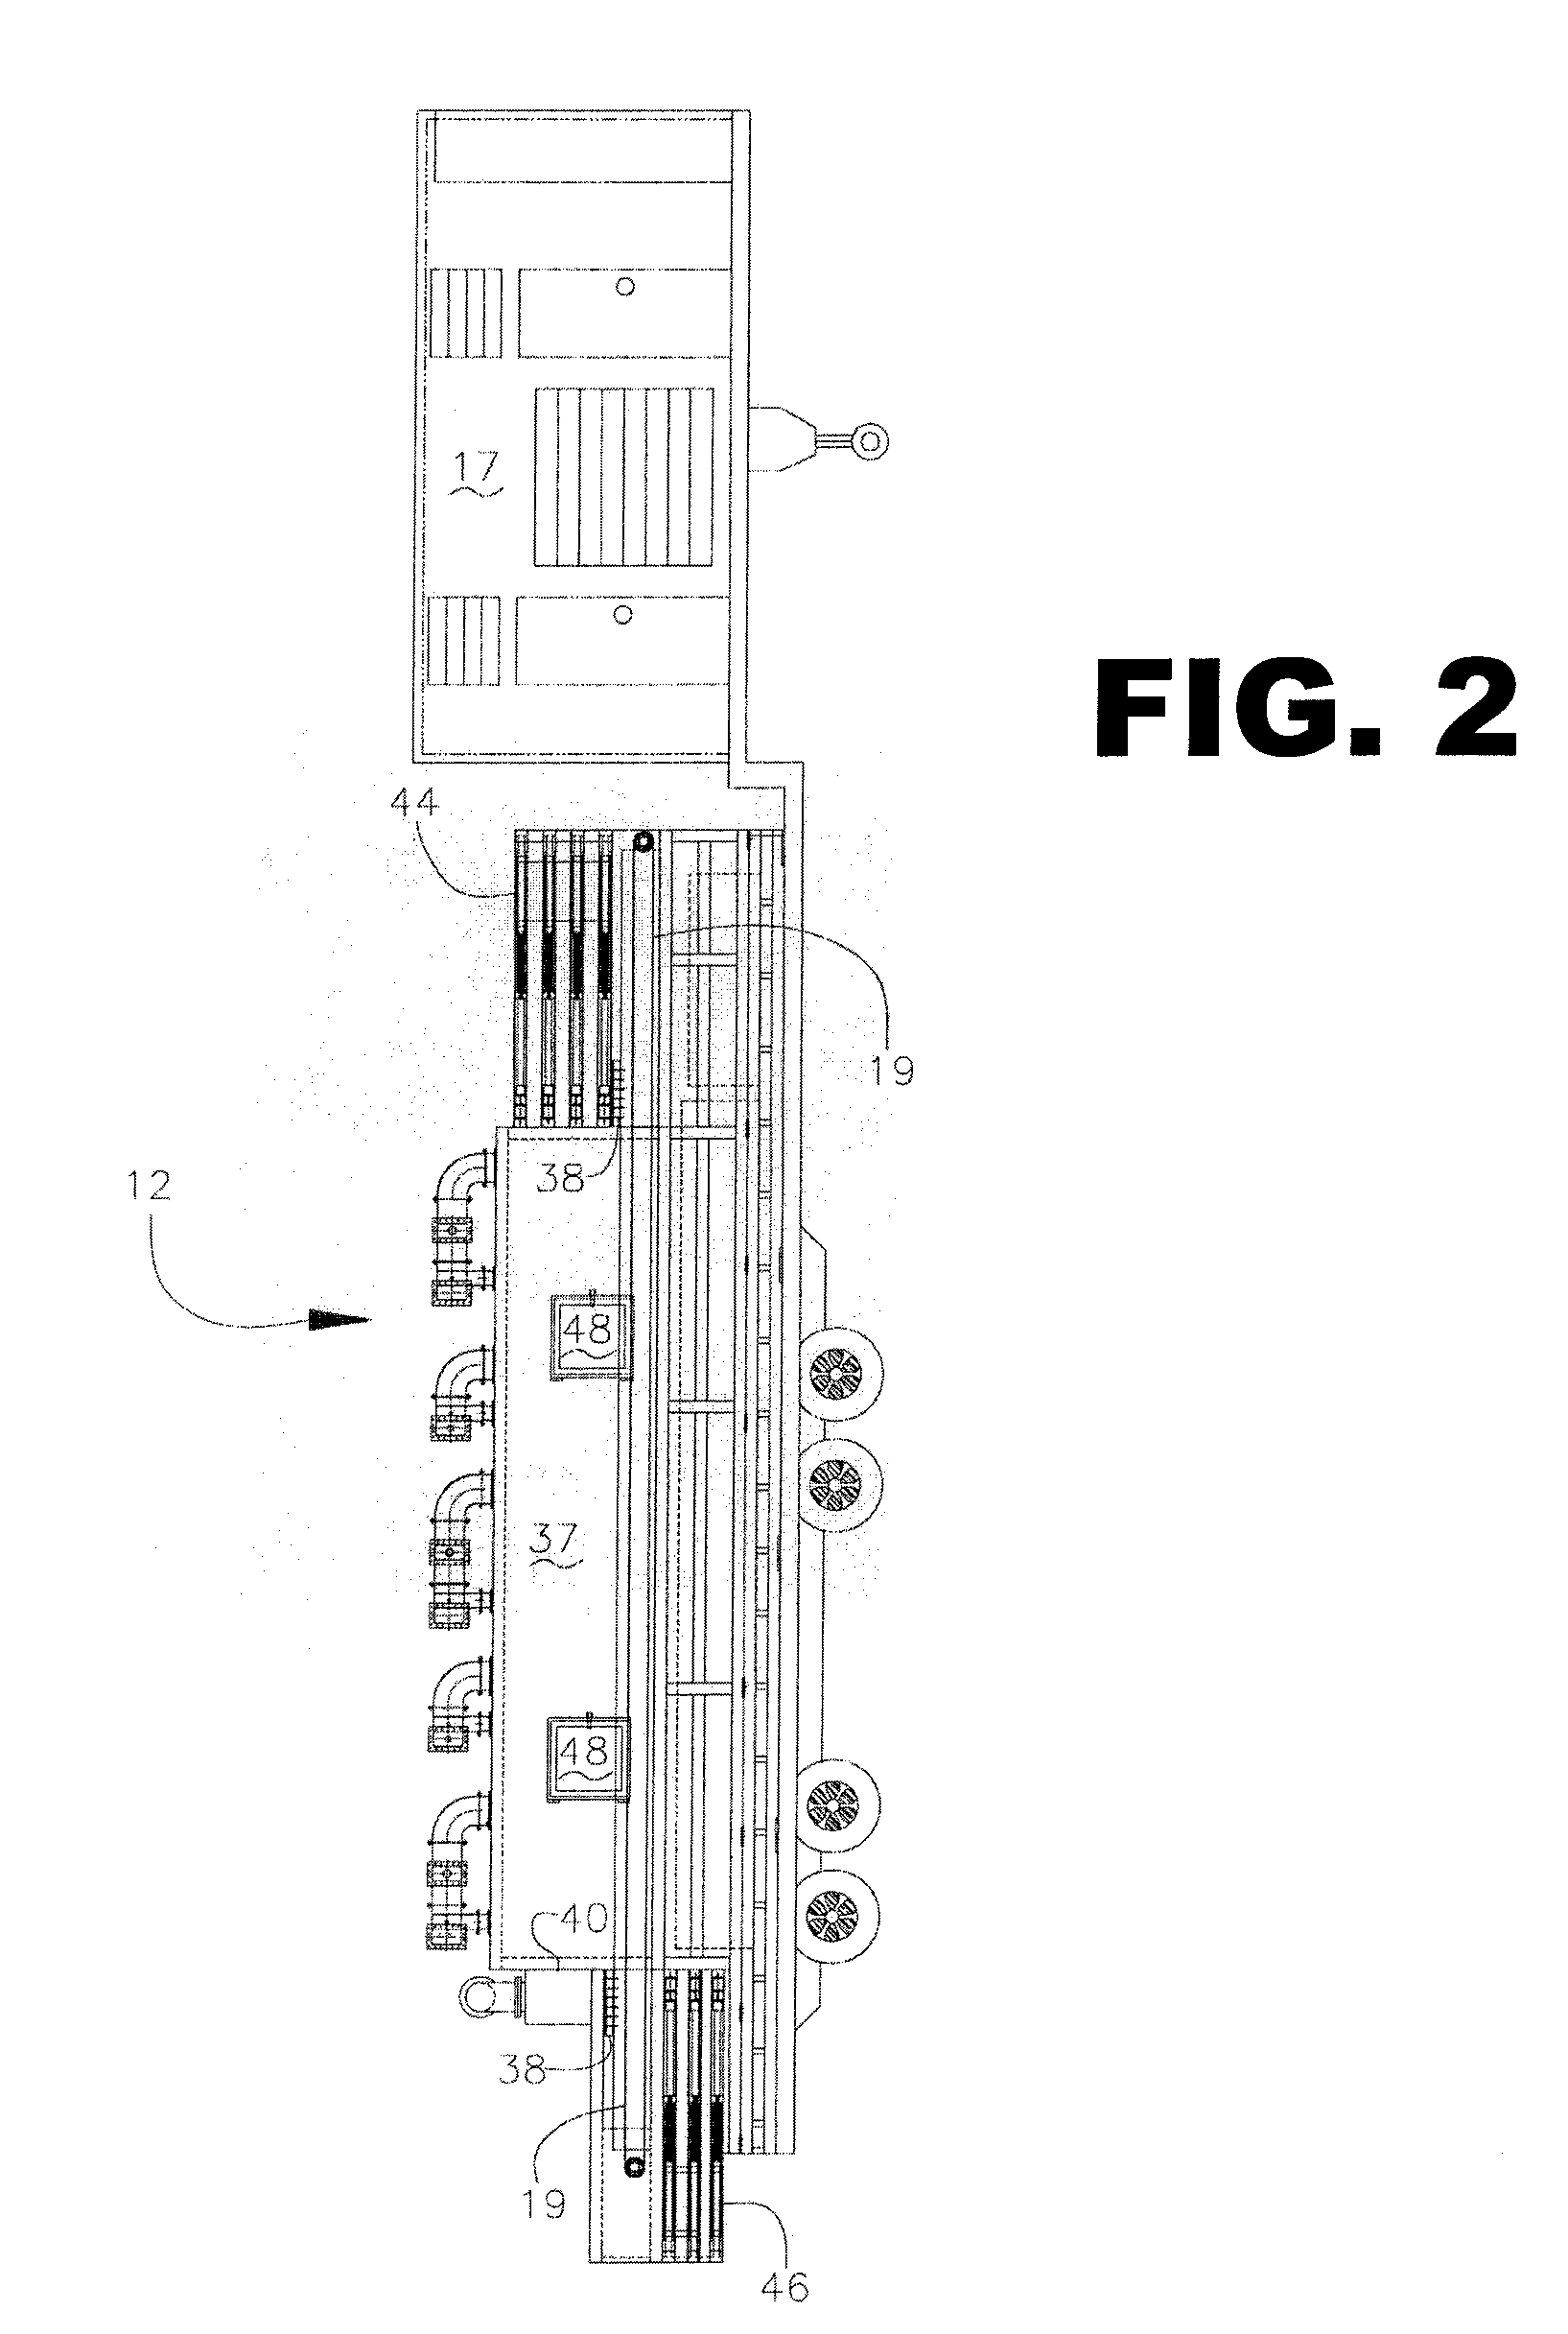 Method and Apparatus for Microwave Reduction of Organic Compounds